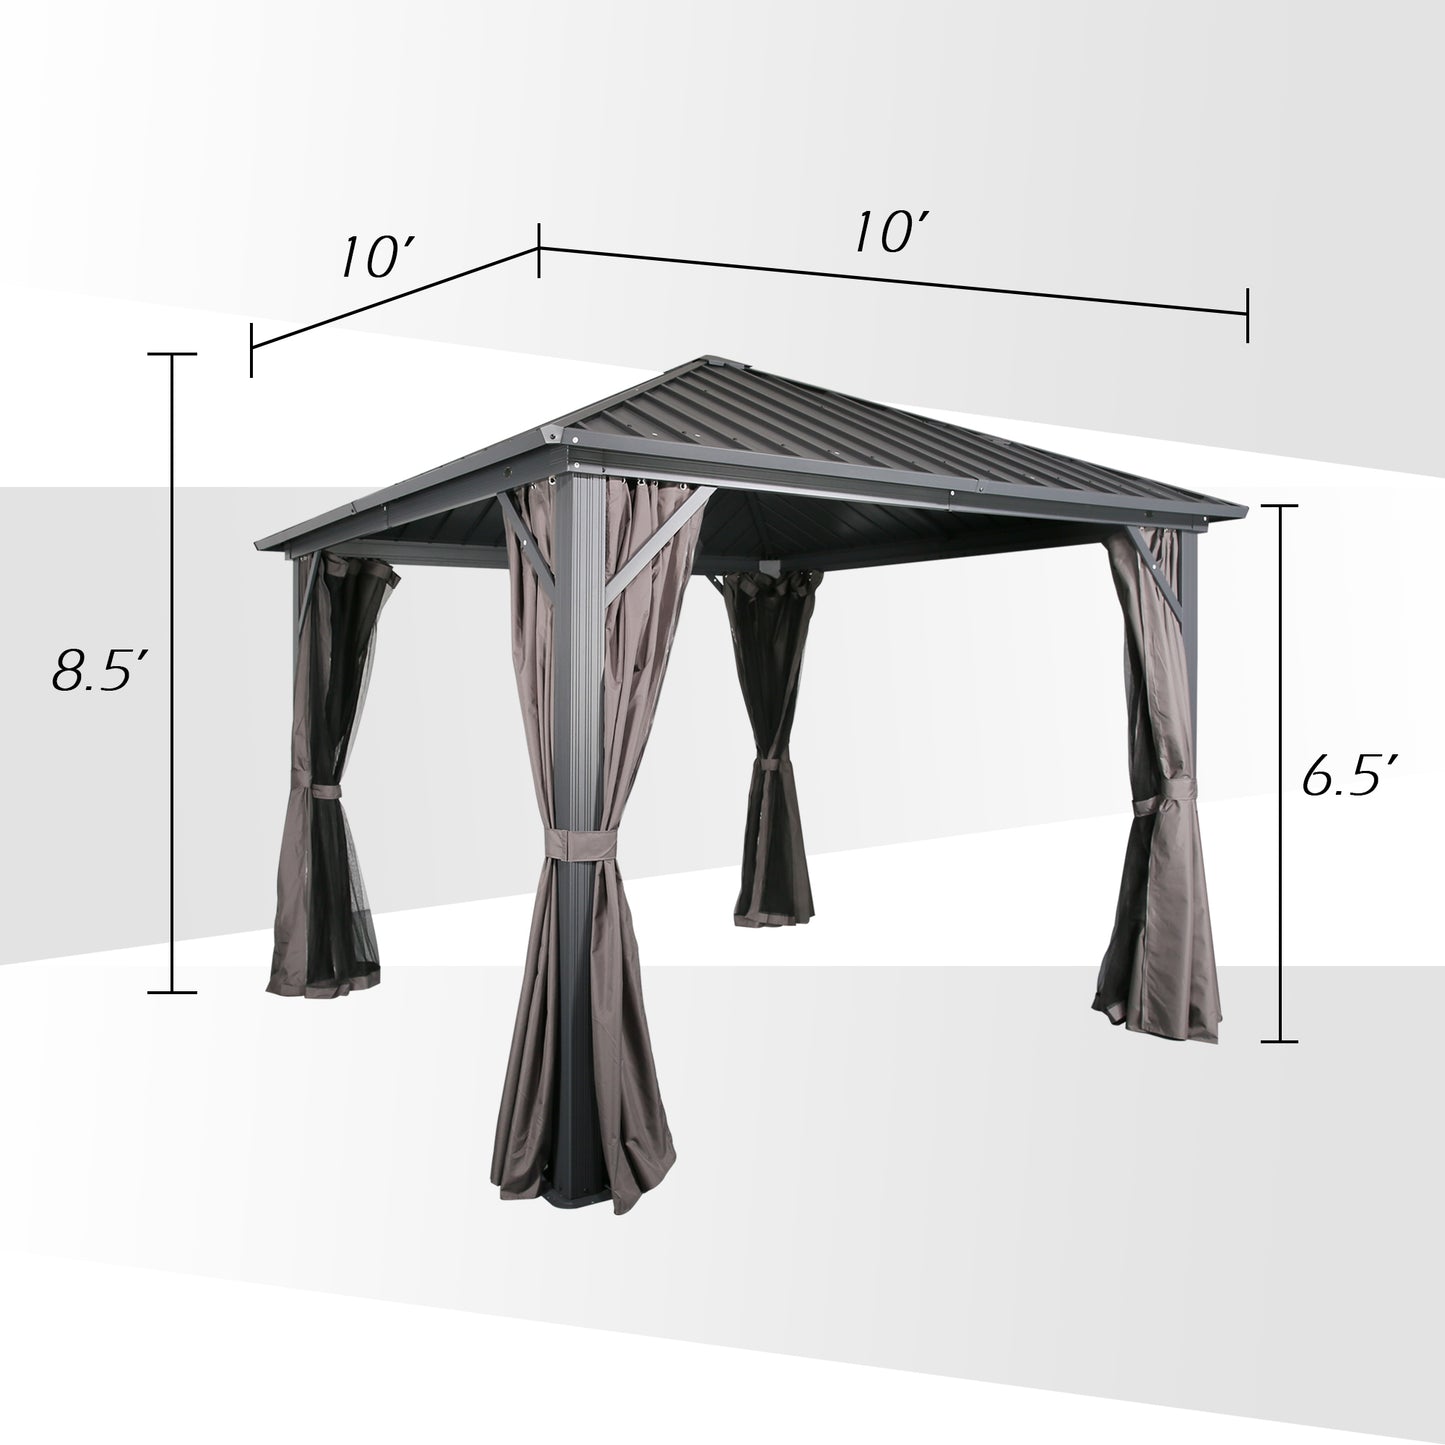 10Ft x 10Ft Patio Hardtop Gazebo Outdoor Aluminum Pergola with Galvanized Steel Roof Canopy, Polyester Curtain and Mosquito Net